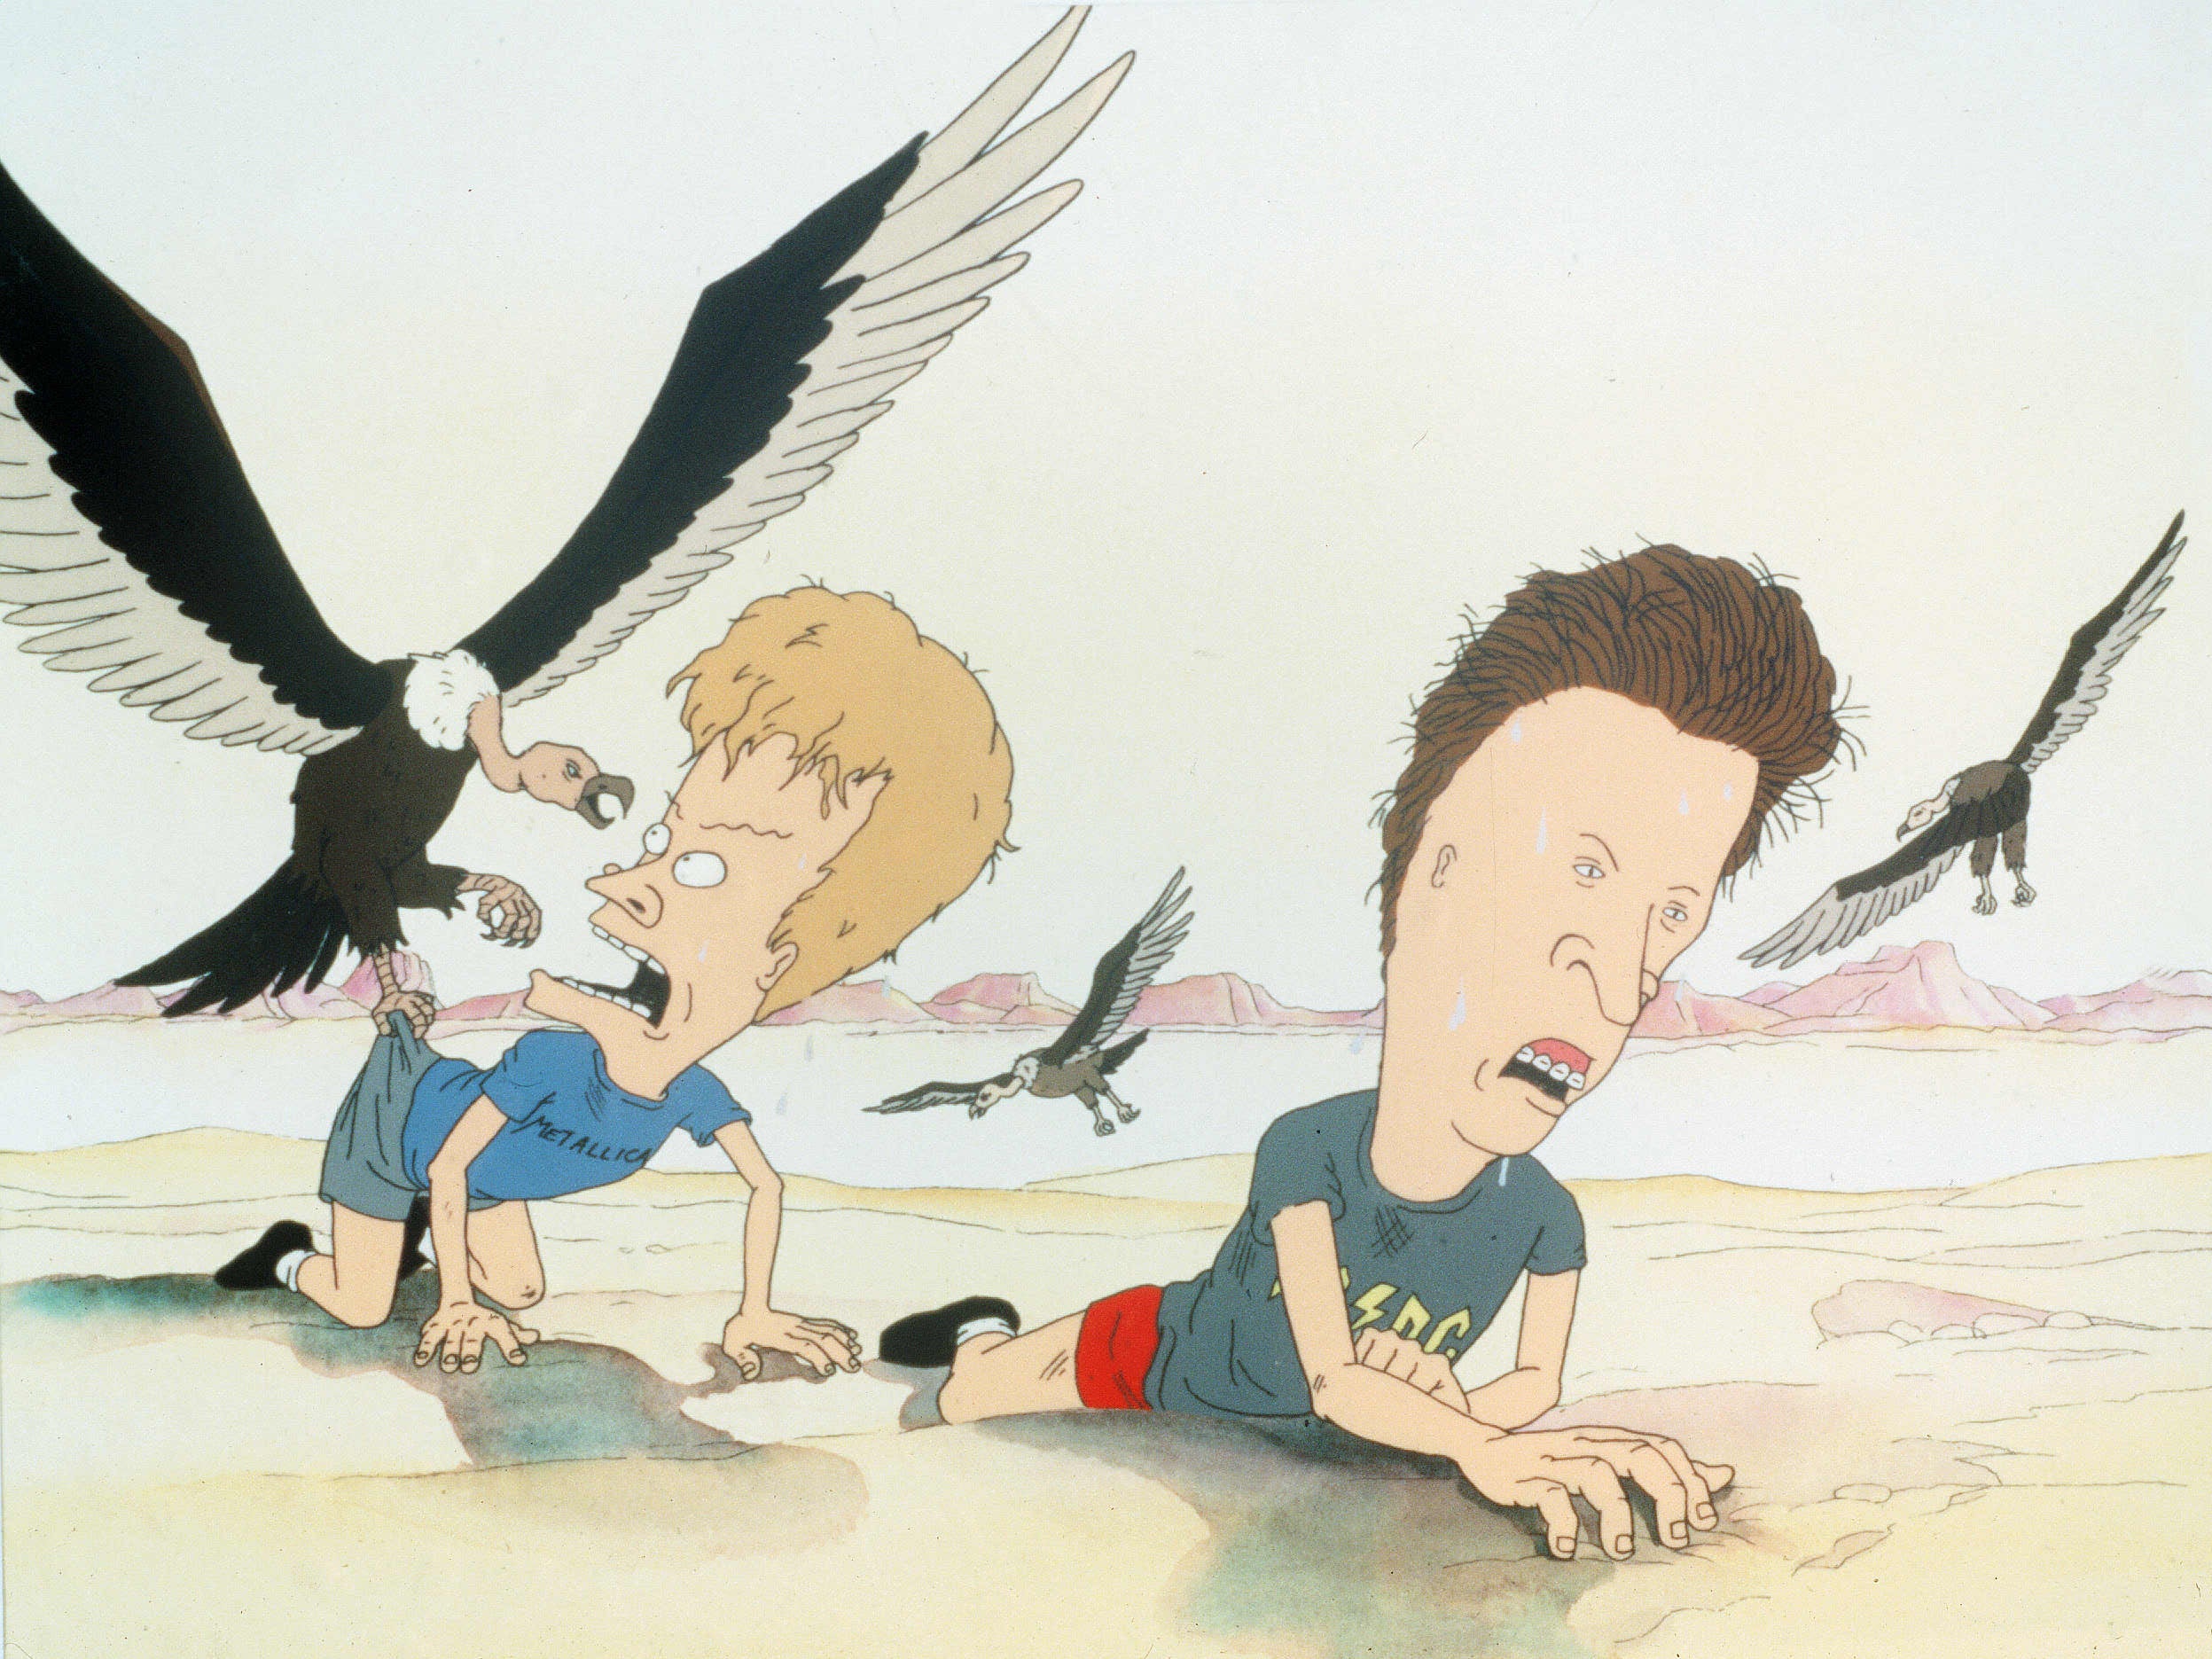 Beavis and Butt-Head lost in the desert during their big screen debut